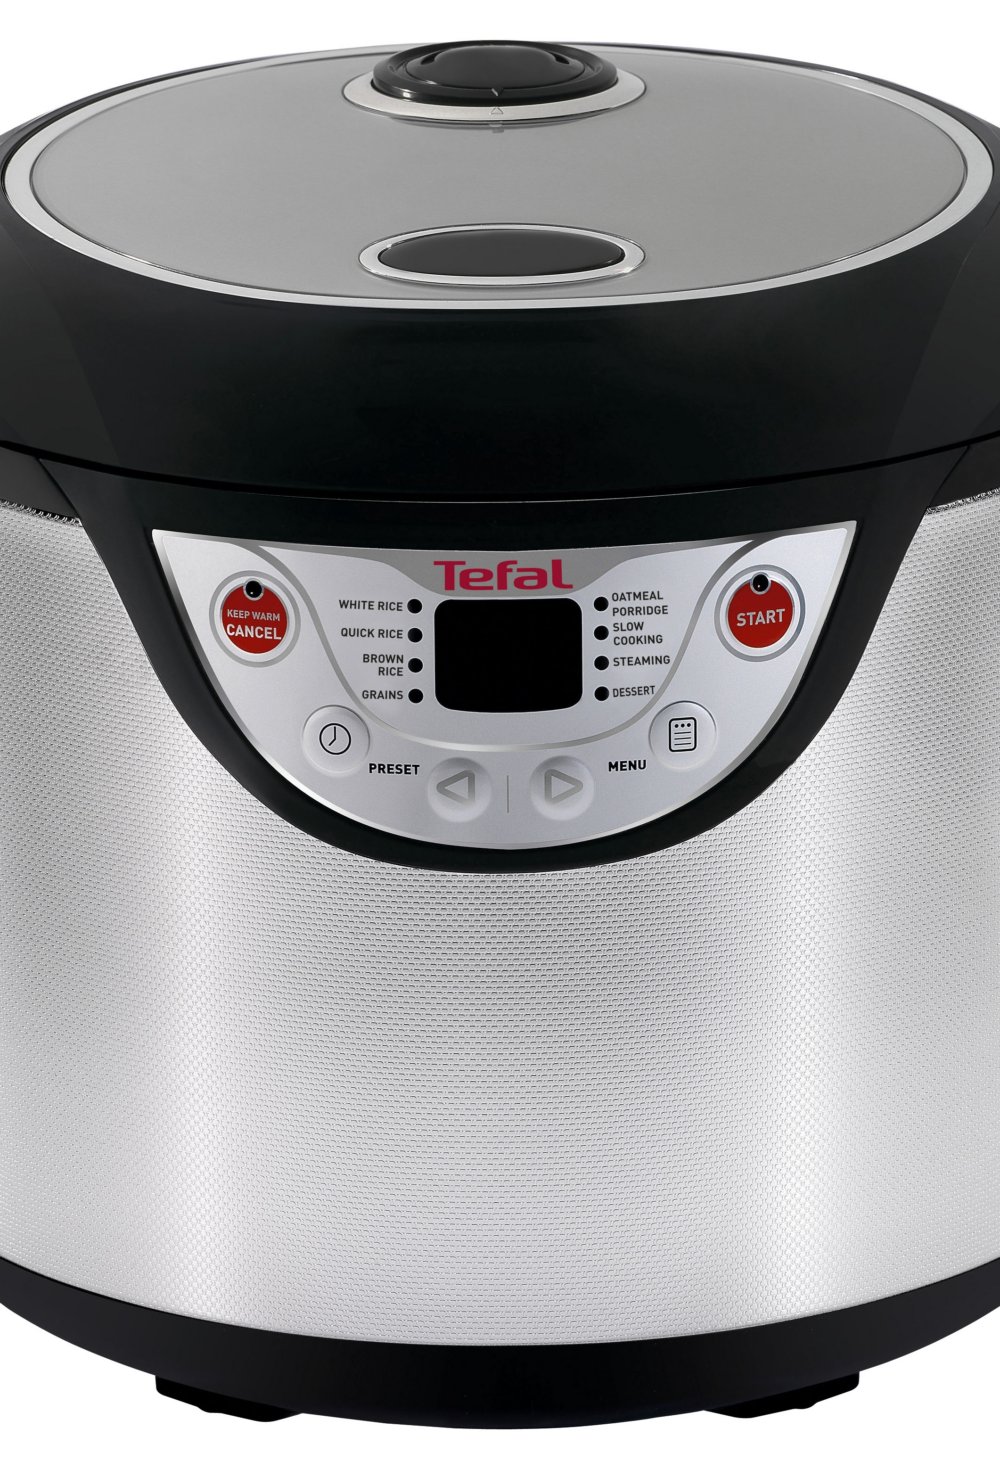 dichters volleybal in de tussentijd Tefal 8 in 1 Cooker - Review & Giveaway